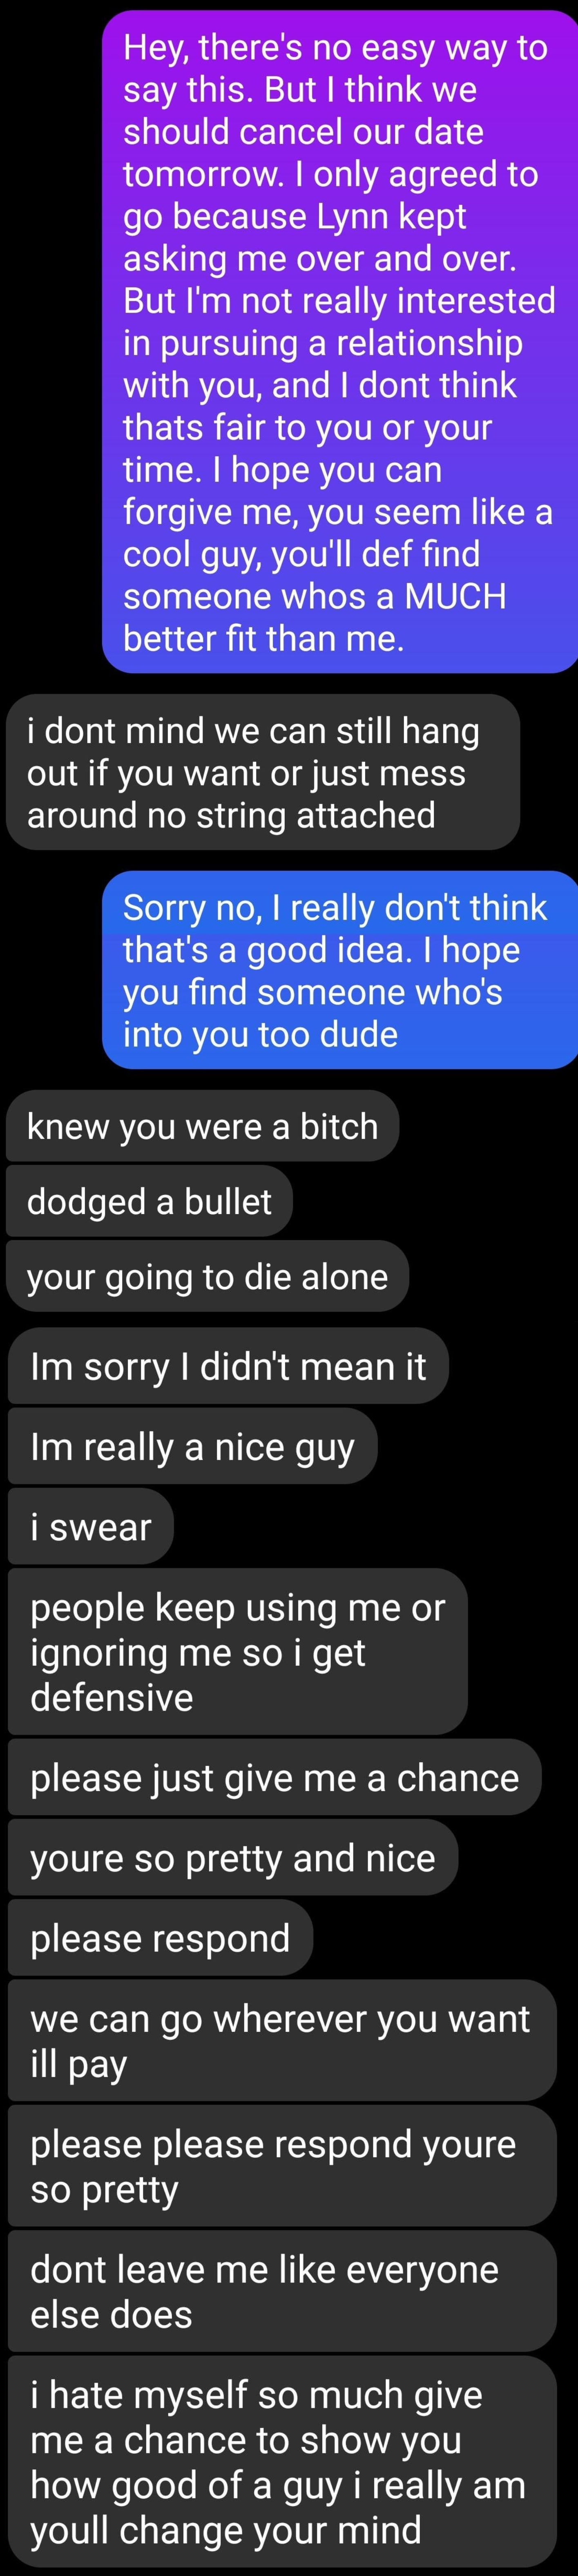 guy calls woman a bitch after she rejects and then sends a bunch of messages pleading her to respond